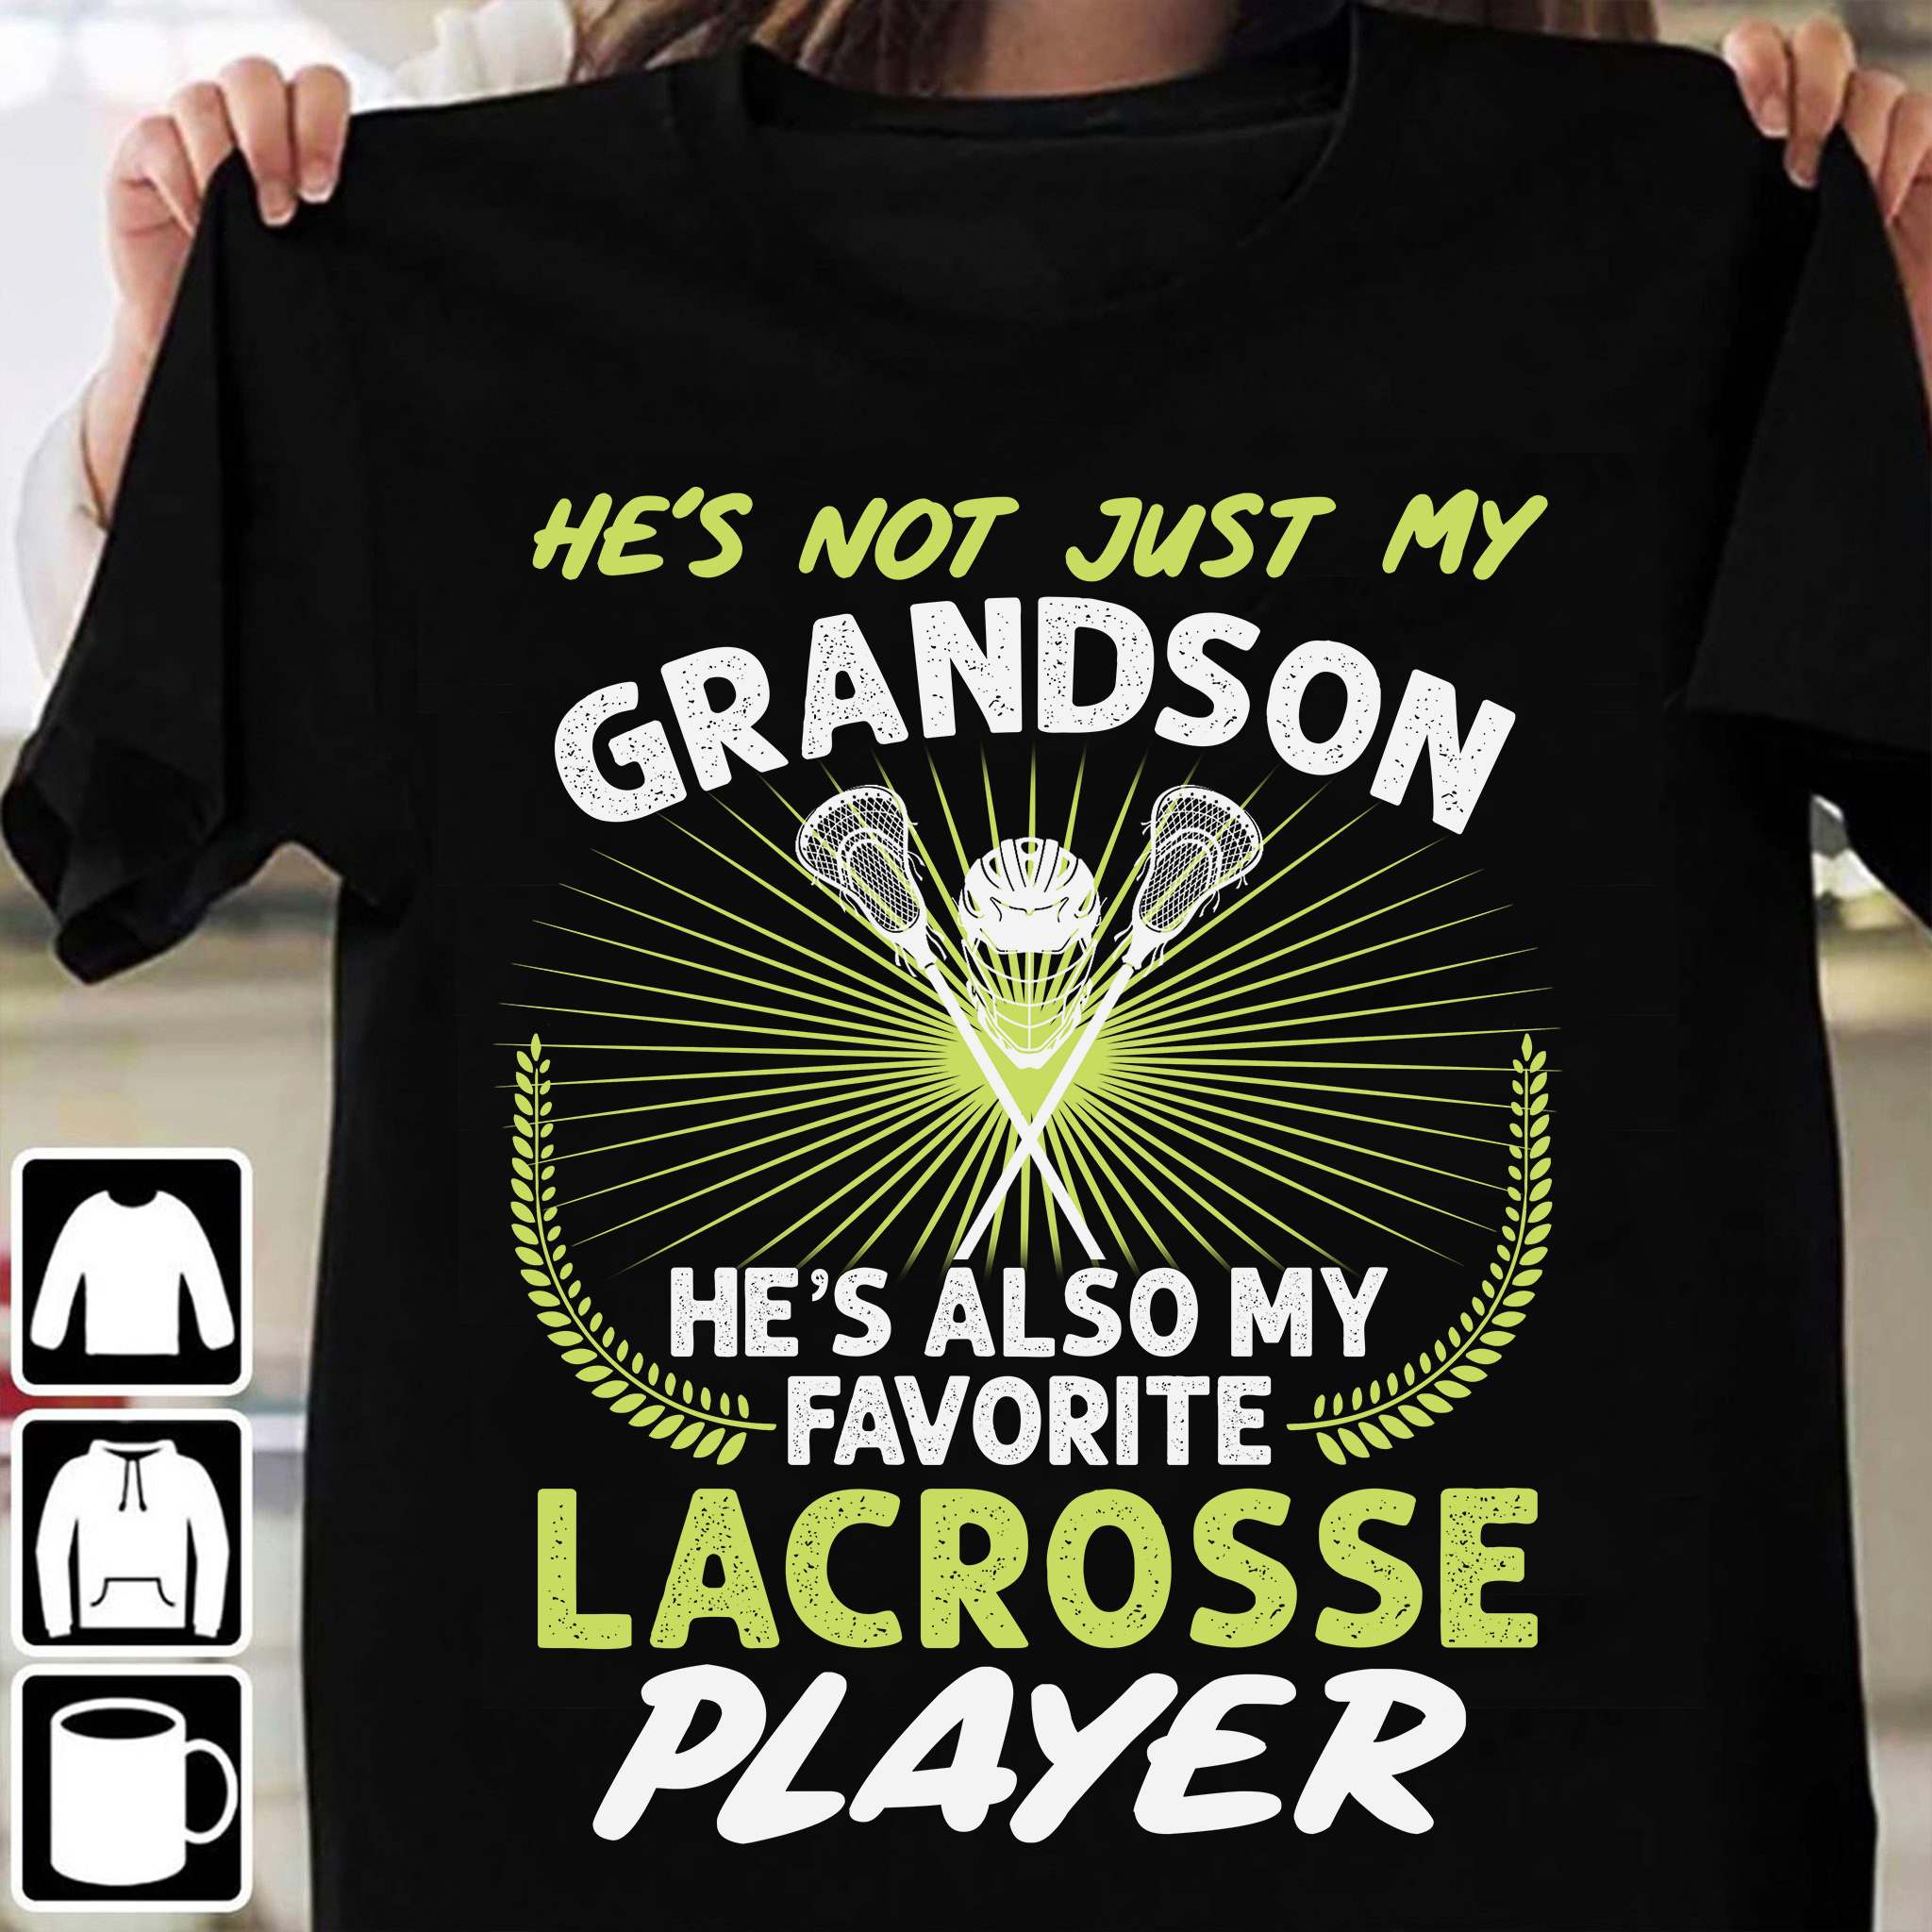 Lacrosse Player - He's not just my grandson he's also my favourite lacrosse player